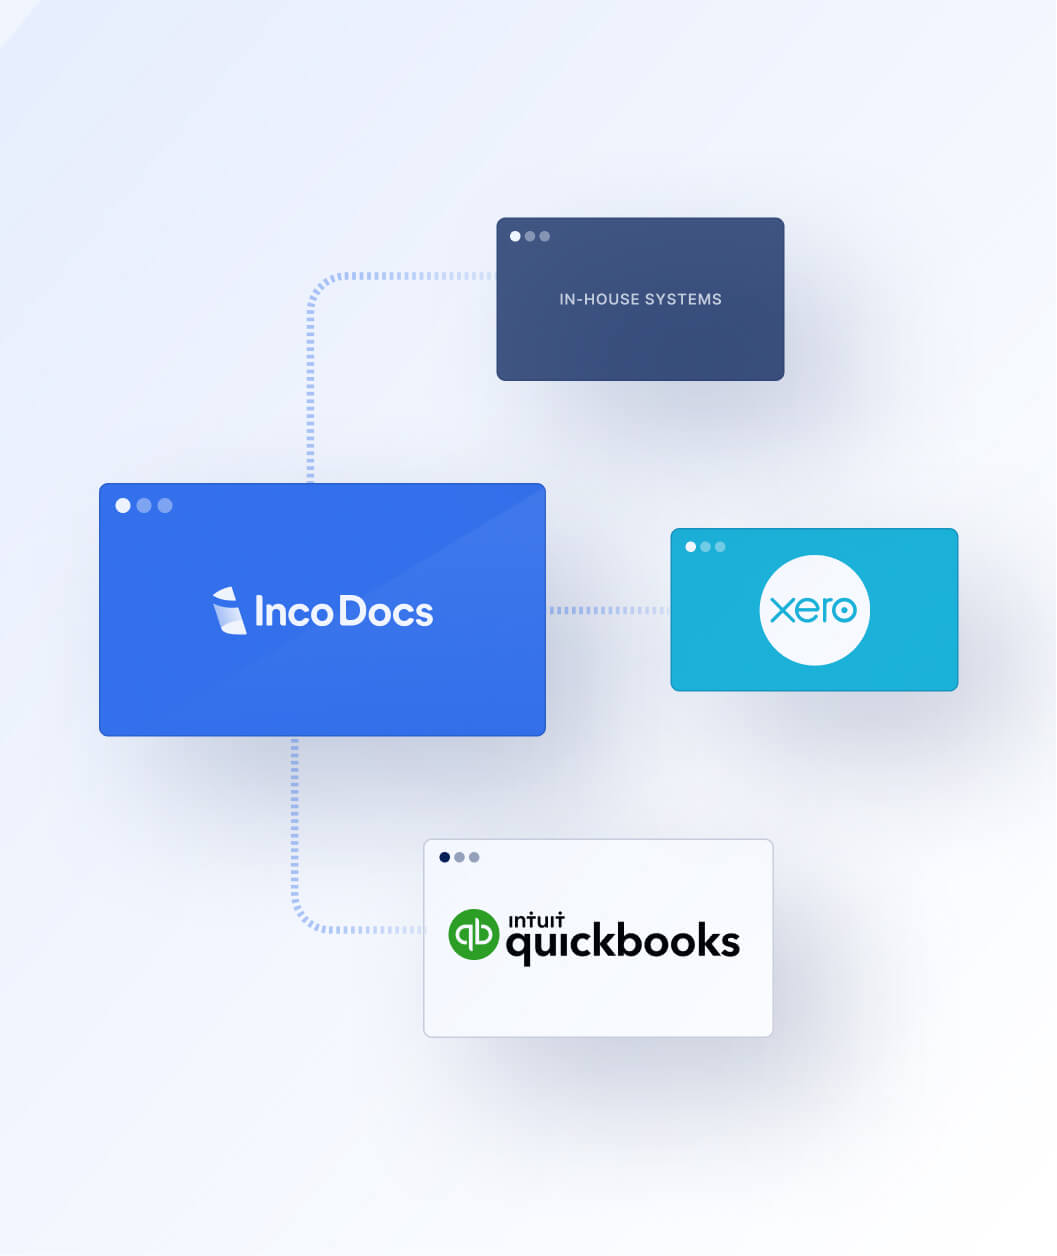 IncoDocs integrates with your accounting system